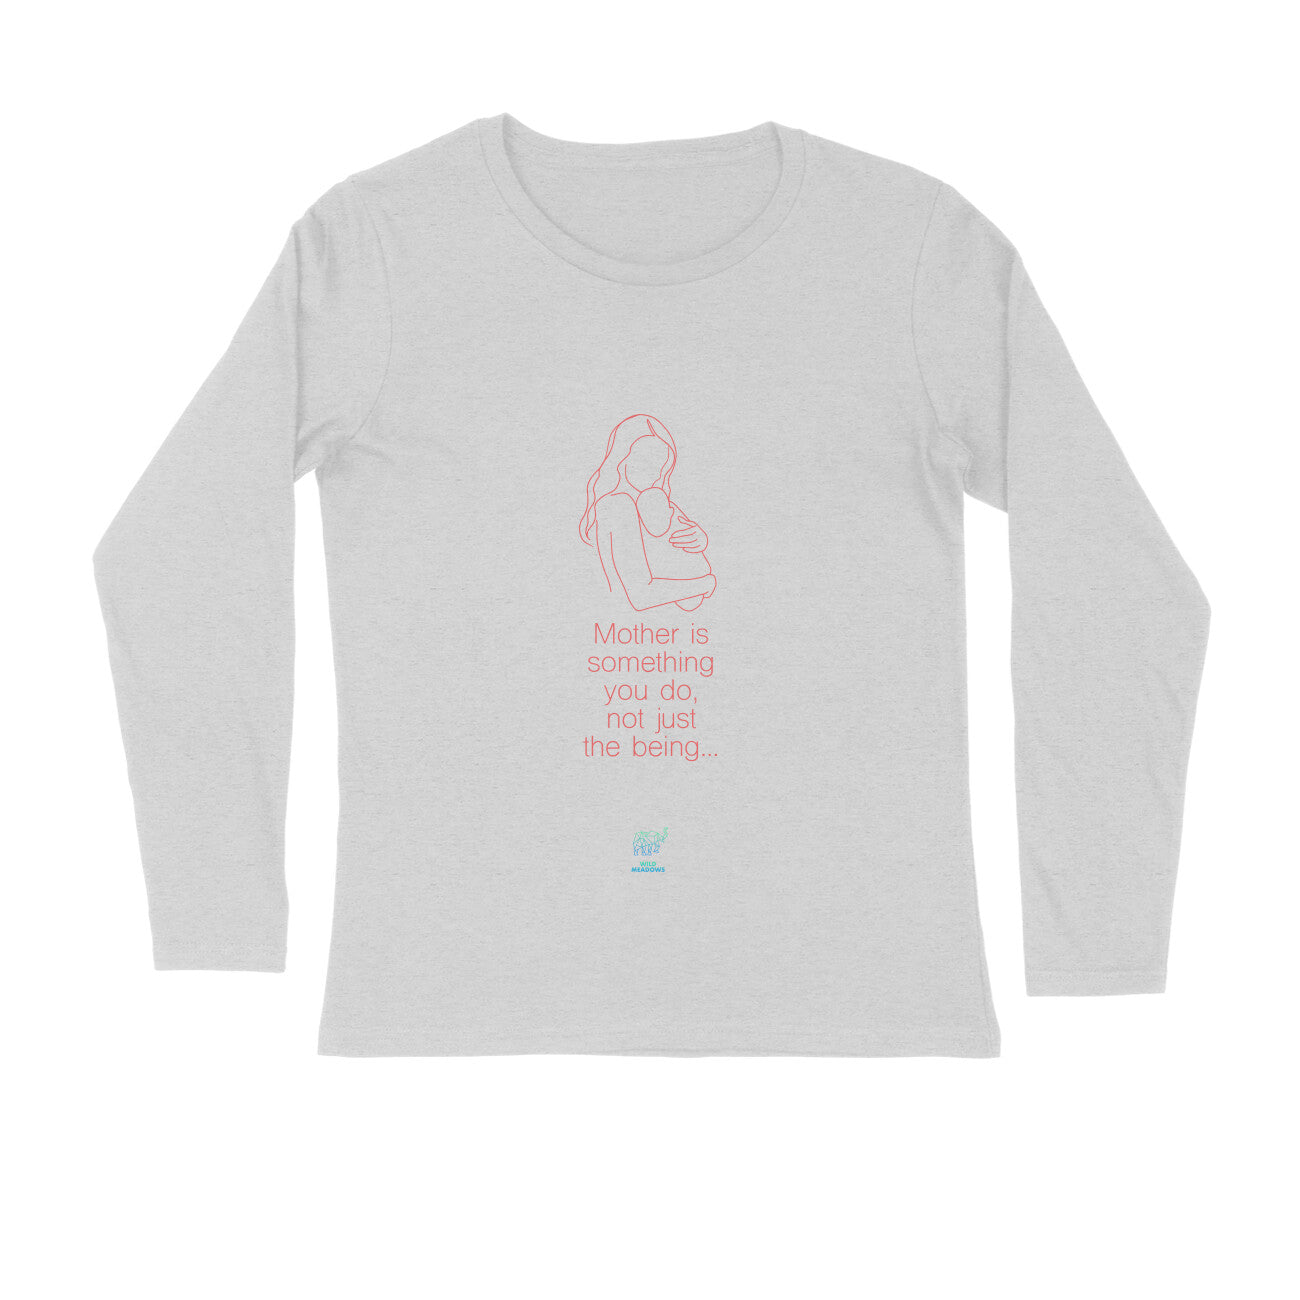 MOM - Mother is something you do, not just the being - Long Sleeve Round Neck Tee